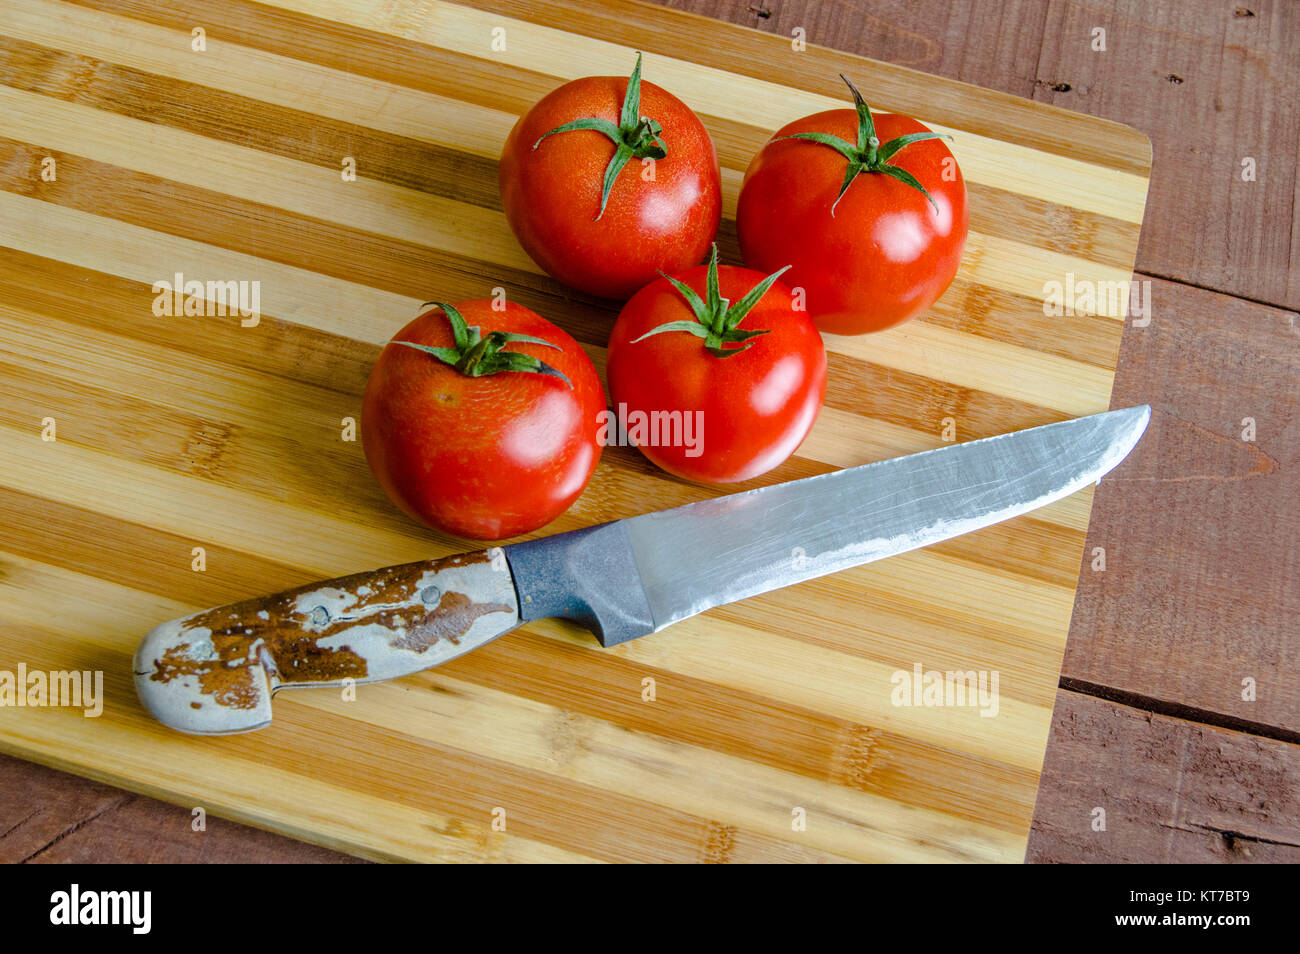 Tomatoes ready for salad, pictures of wonderful looking tomatoes Tomatoes on knife and chopping board Stock Photo